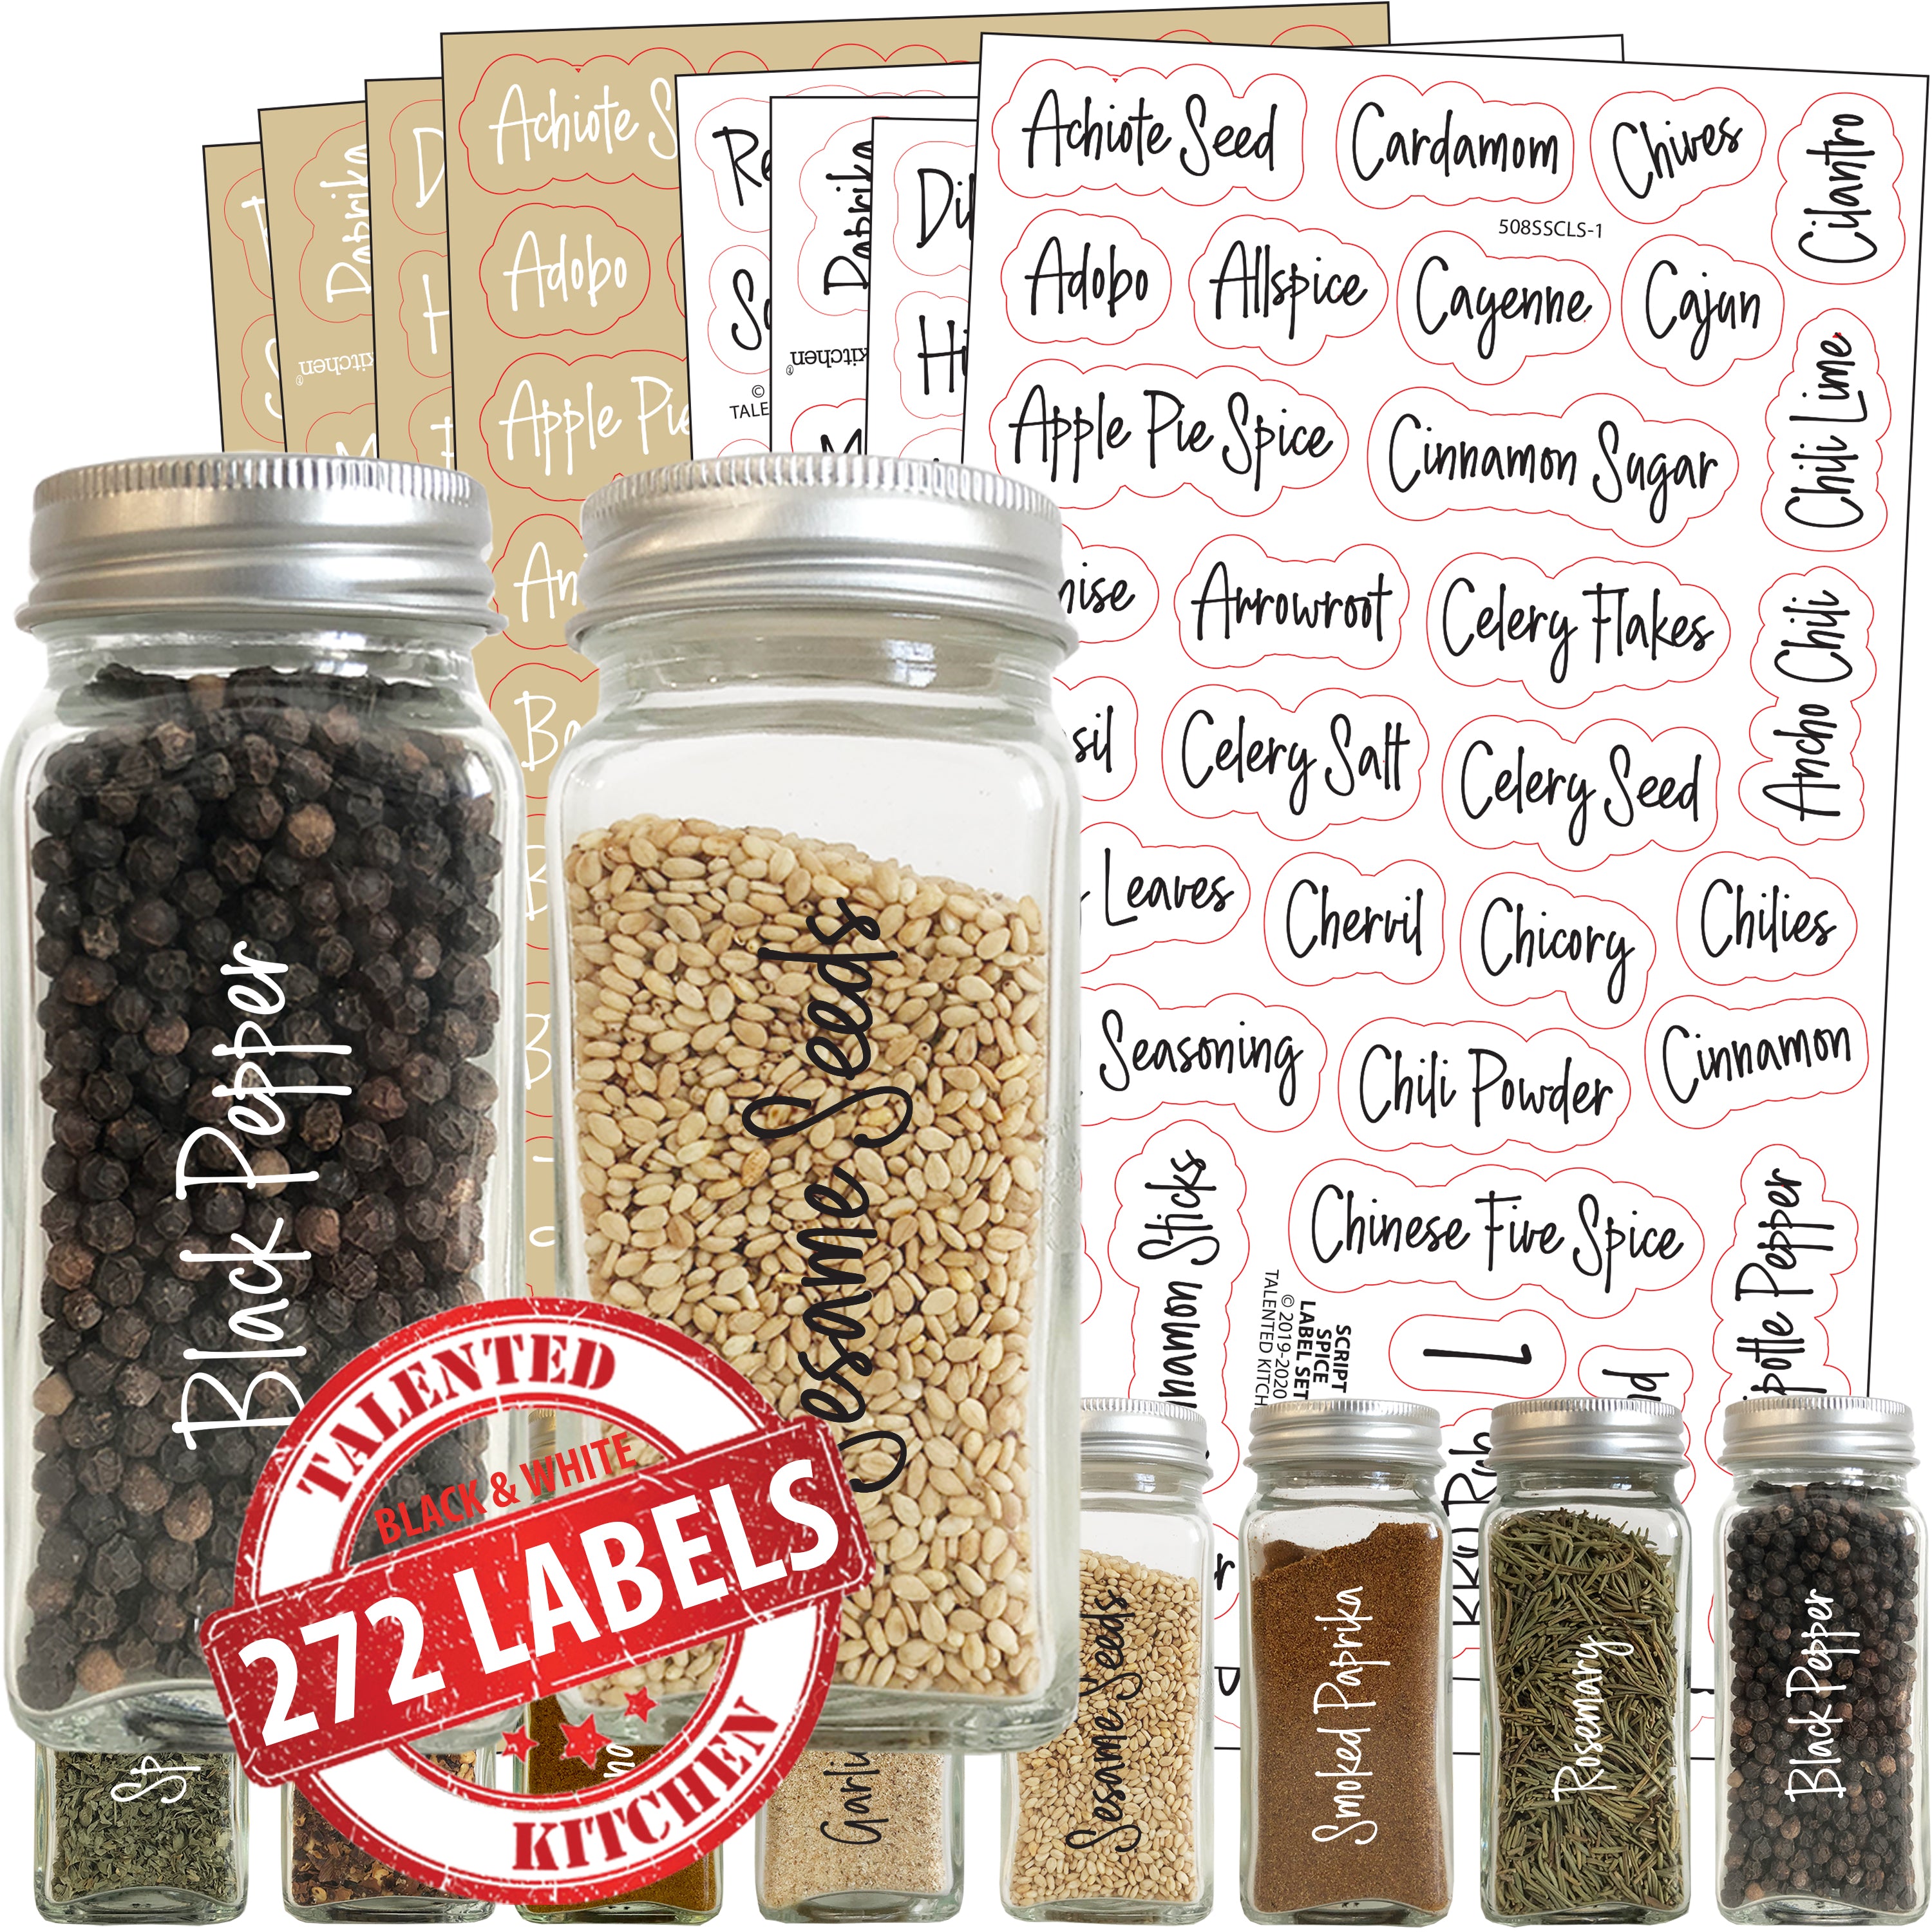 Talented Kitchen 300 Preprinted Spice Labels, Clear Spice Jar Labels for  Seasoning, Herbs, Pantry and Kitchen Spice Rack Organization, Black and  White